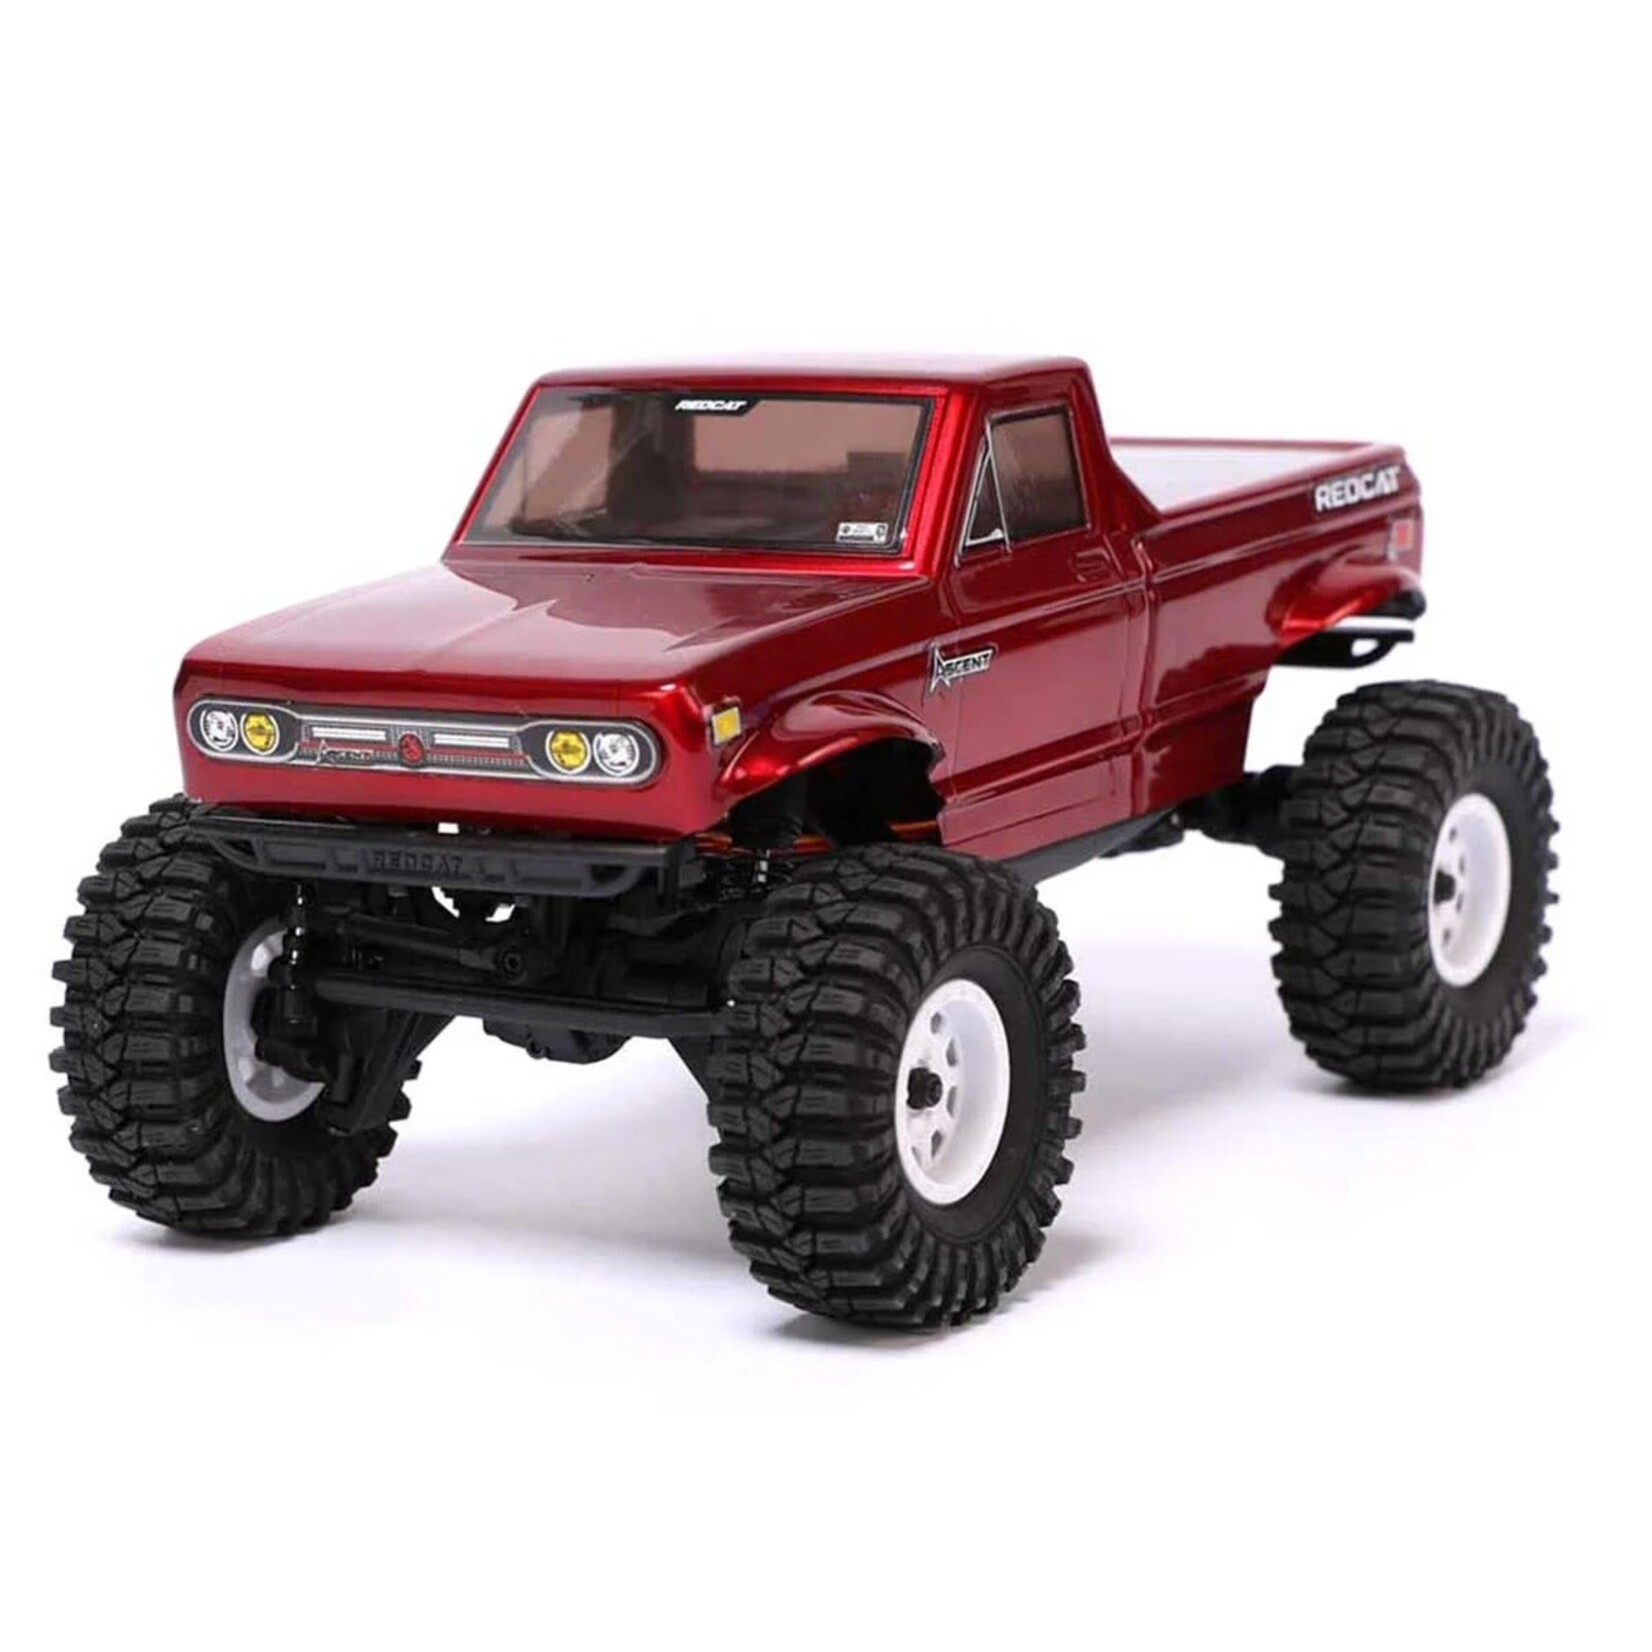 Redcat Racing Redcat Ascent-18 1/18 4WD RTR Rock Crawler (Red) w/2.4GHz Radio, Battery & Charger #RER31320